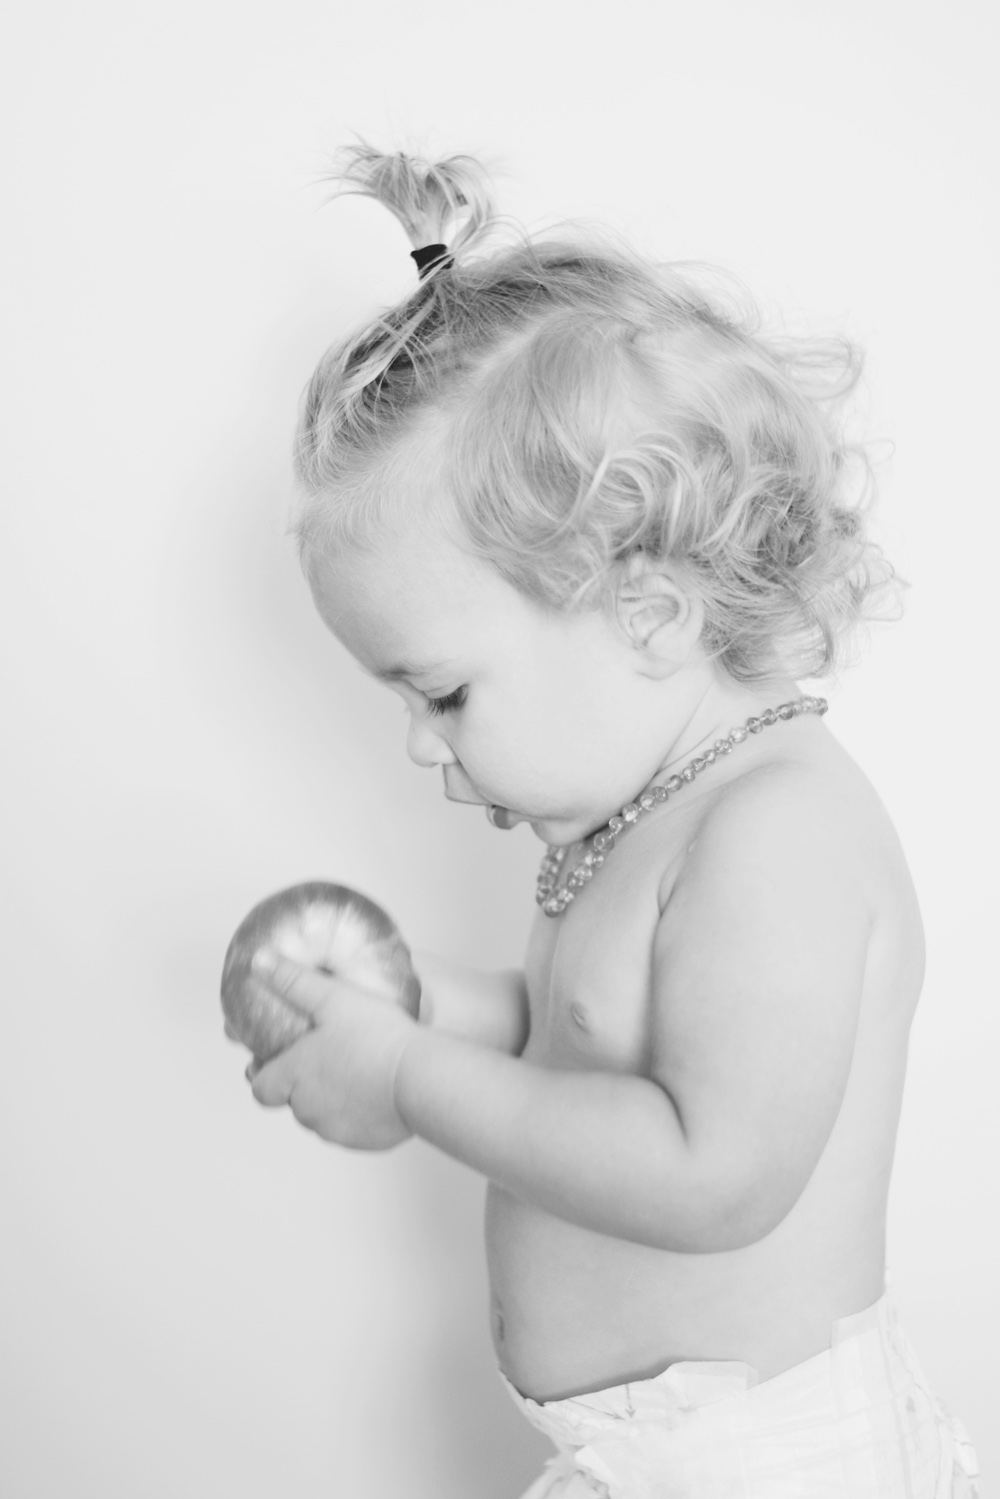 rocco eating an apple, wearing a manbun, being photographed by his sister